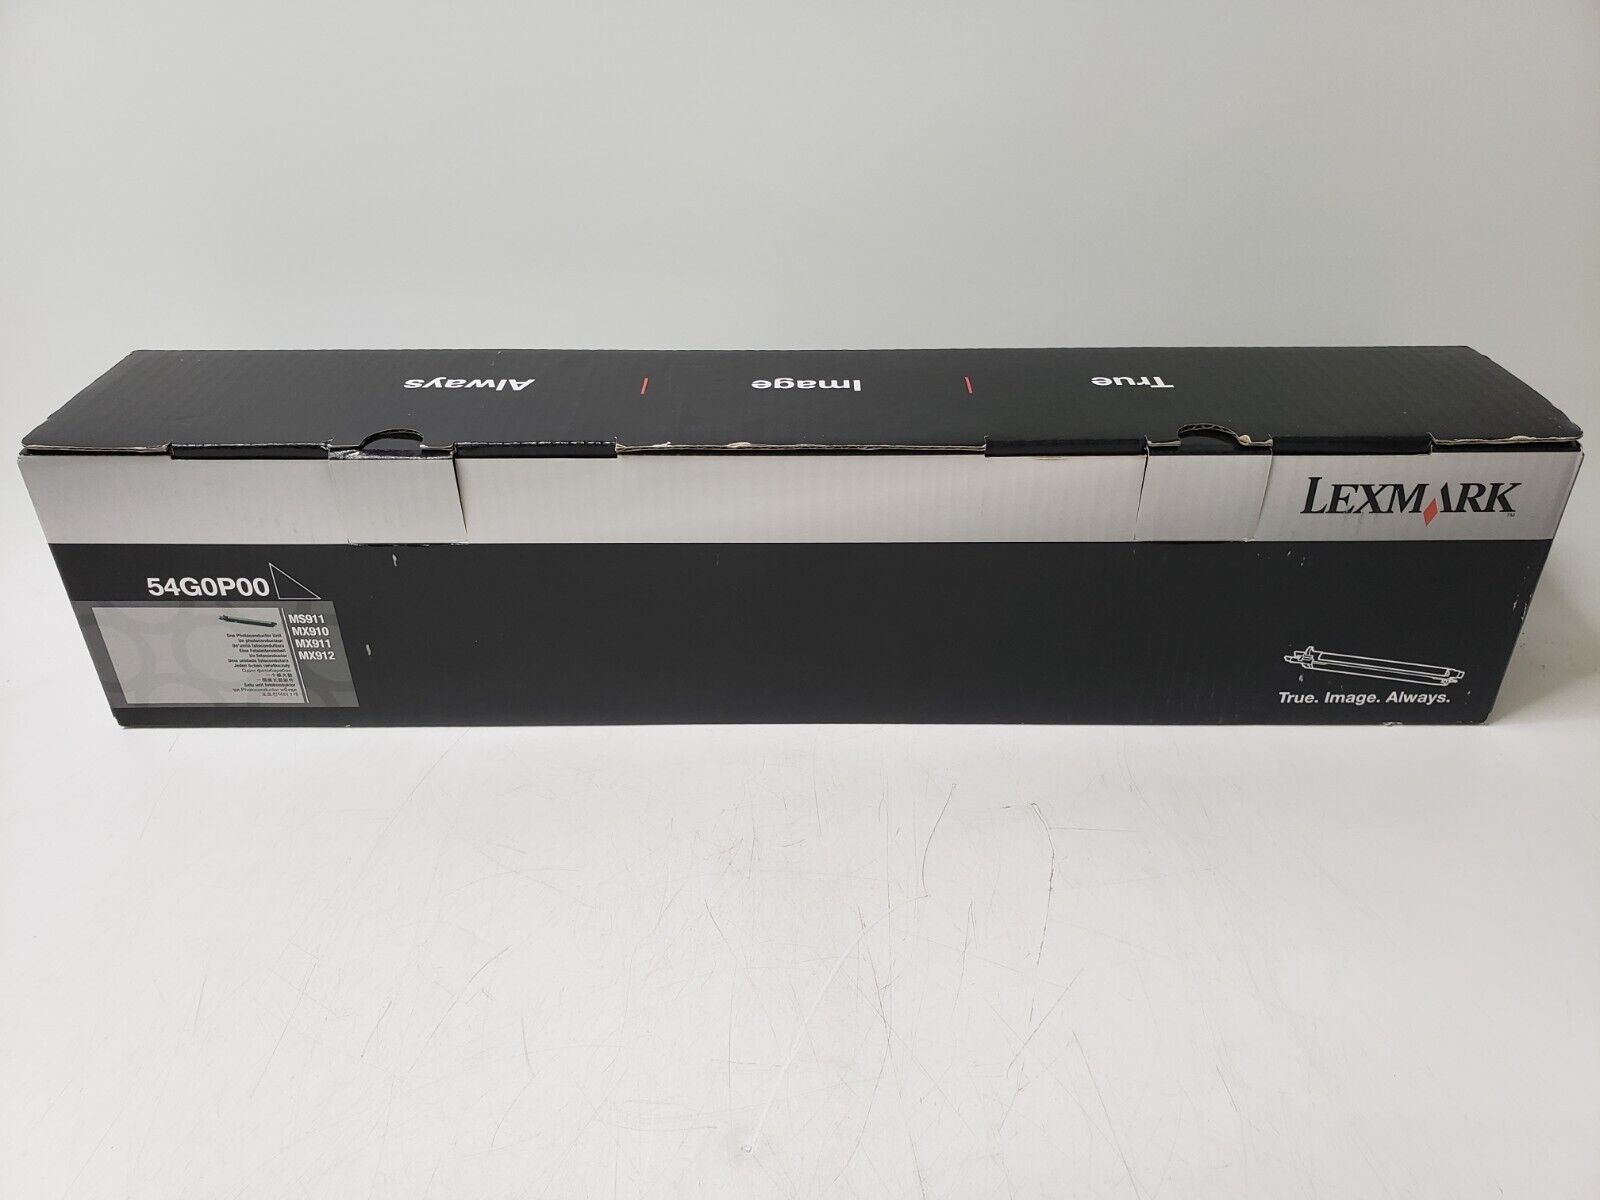 Lexmark Photoconductor Unit (54G0P00) New Sealed in box